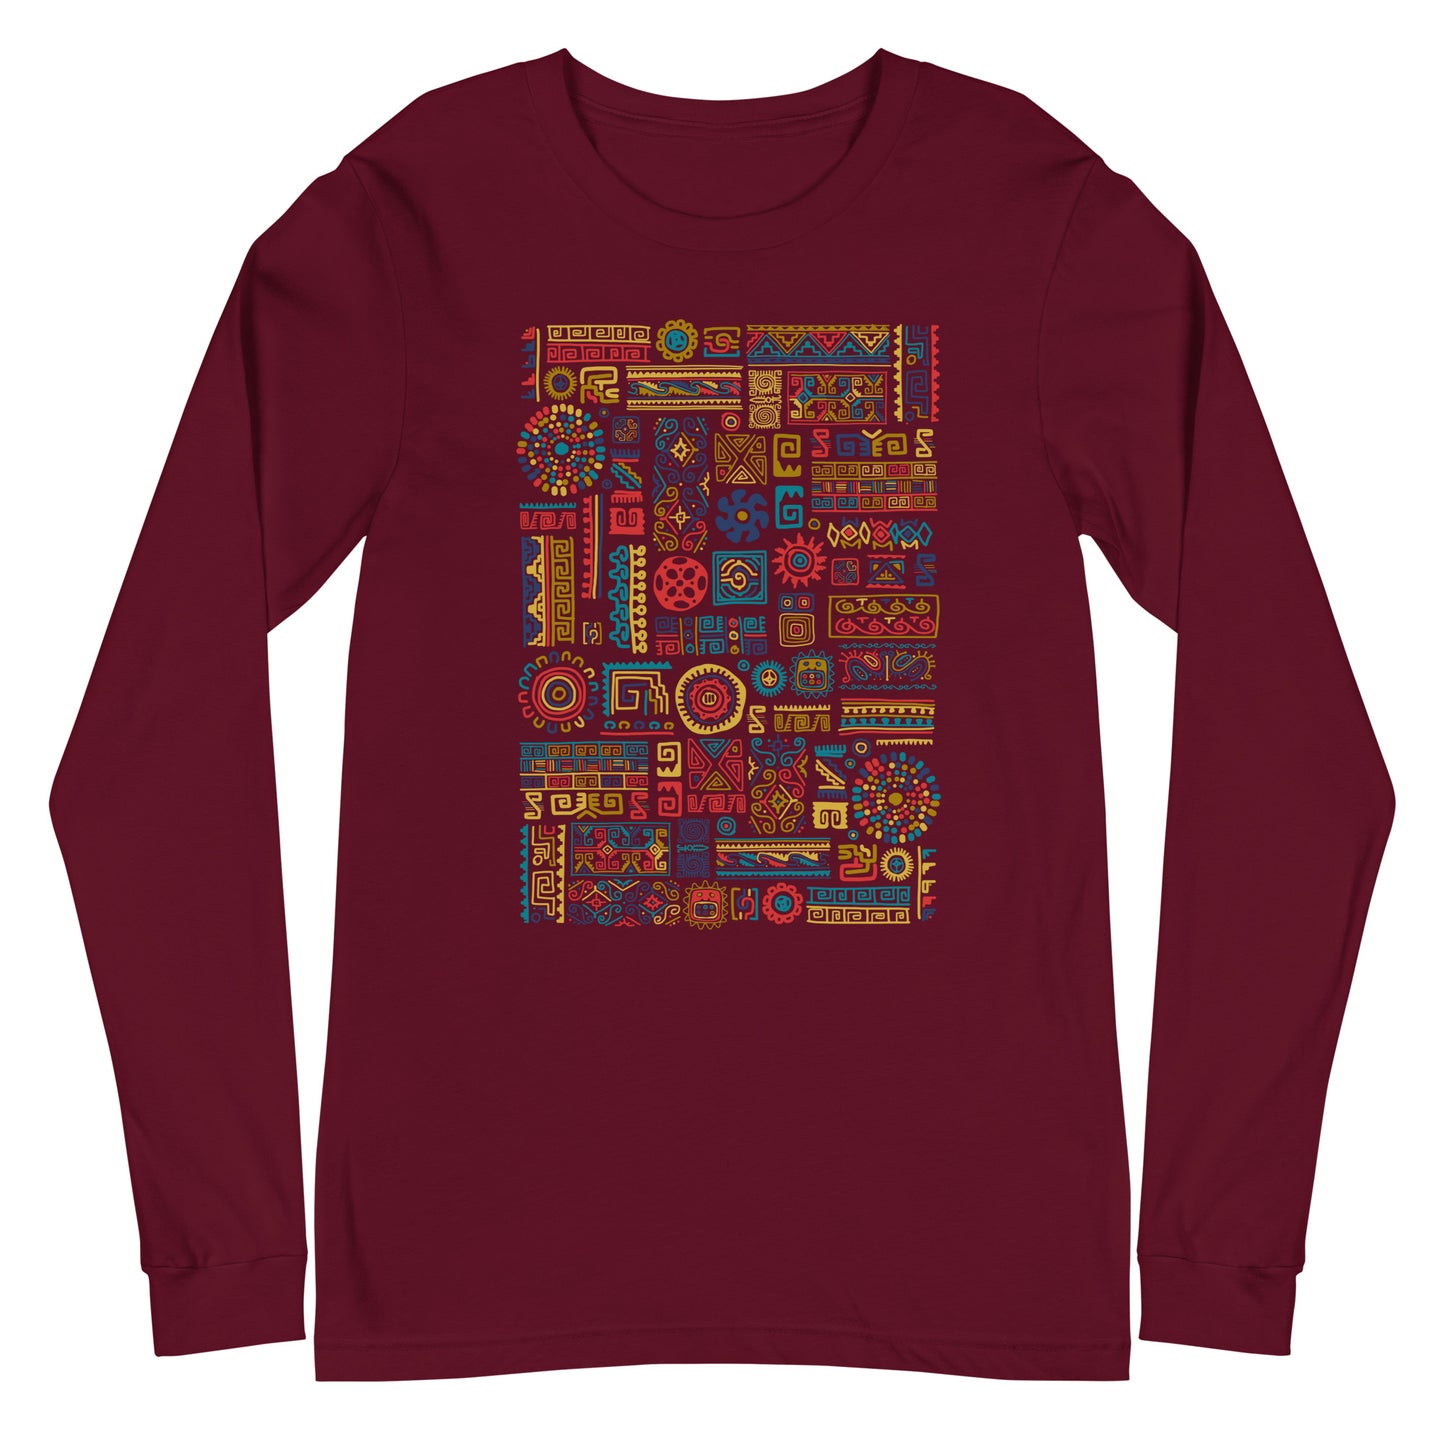 Unisex Long Sleeve dark red color Tee with Ethnic Ornament with Mexican design elements